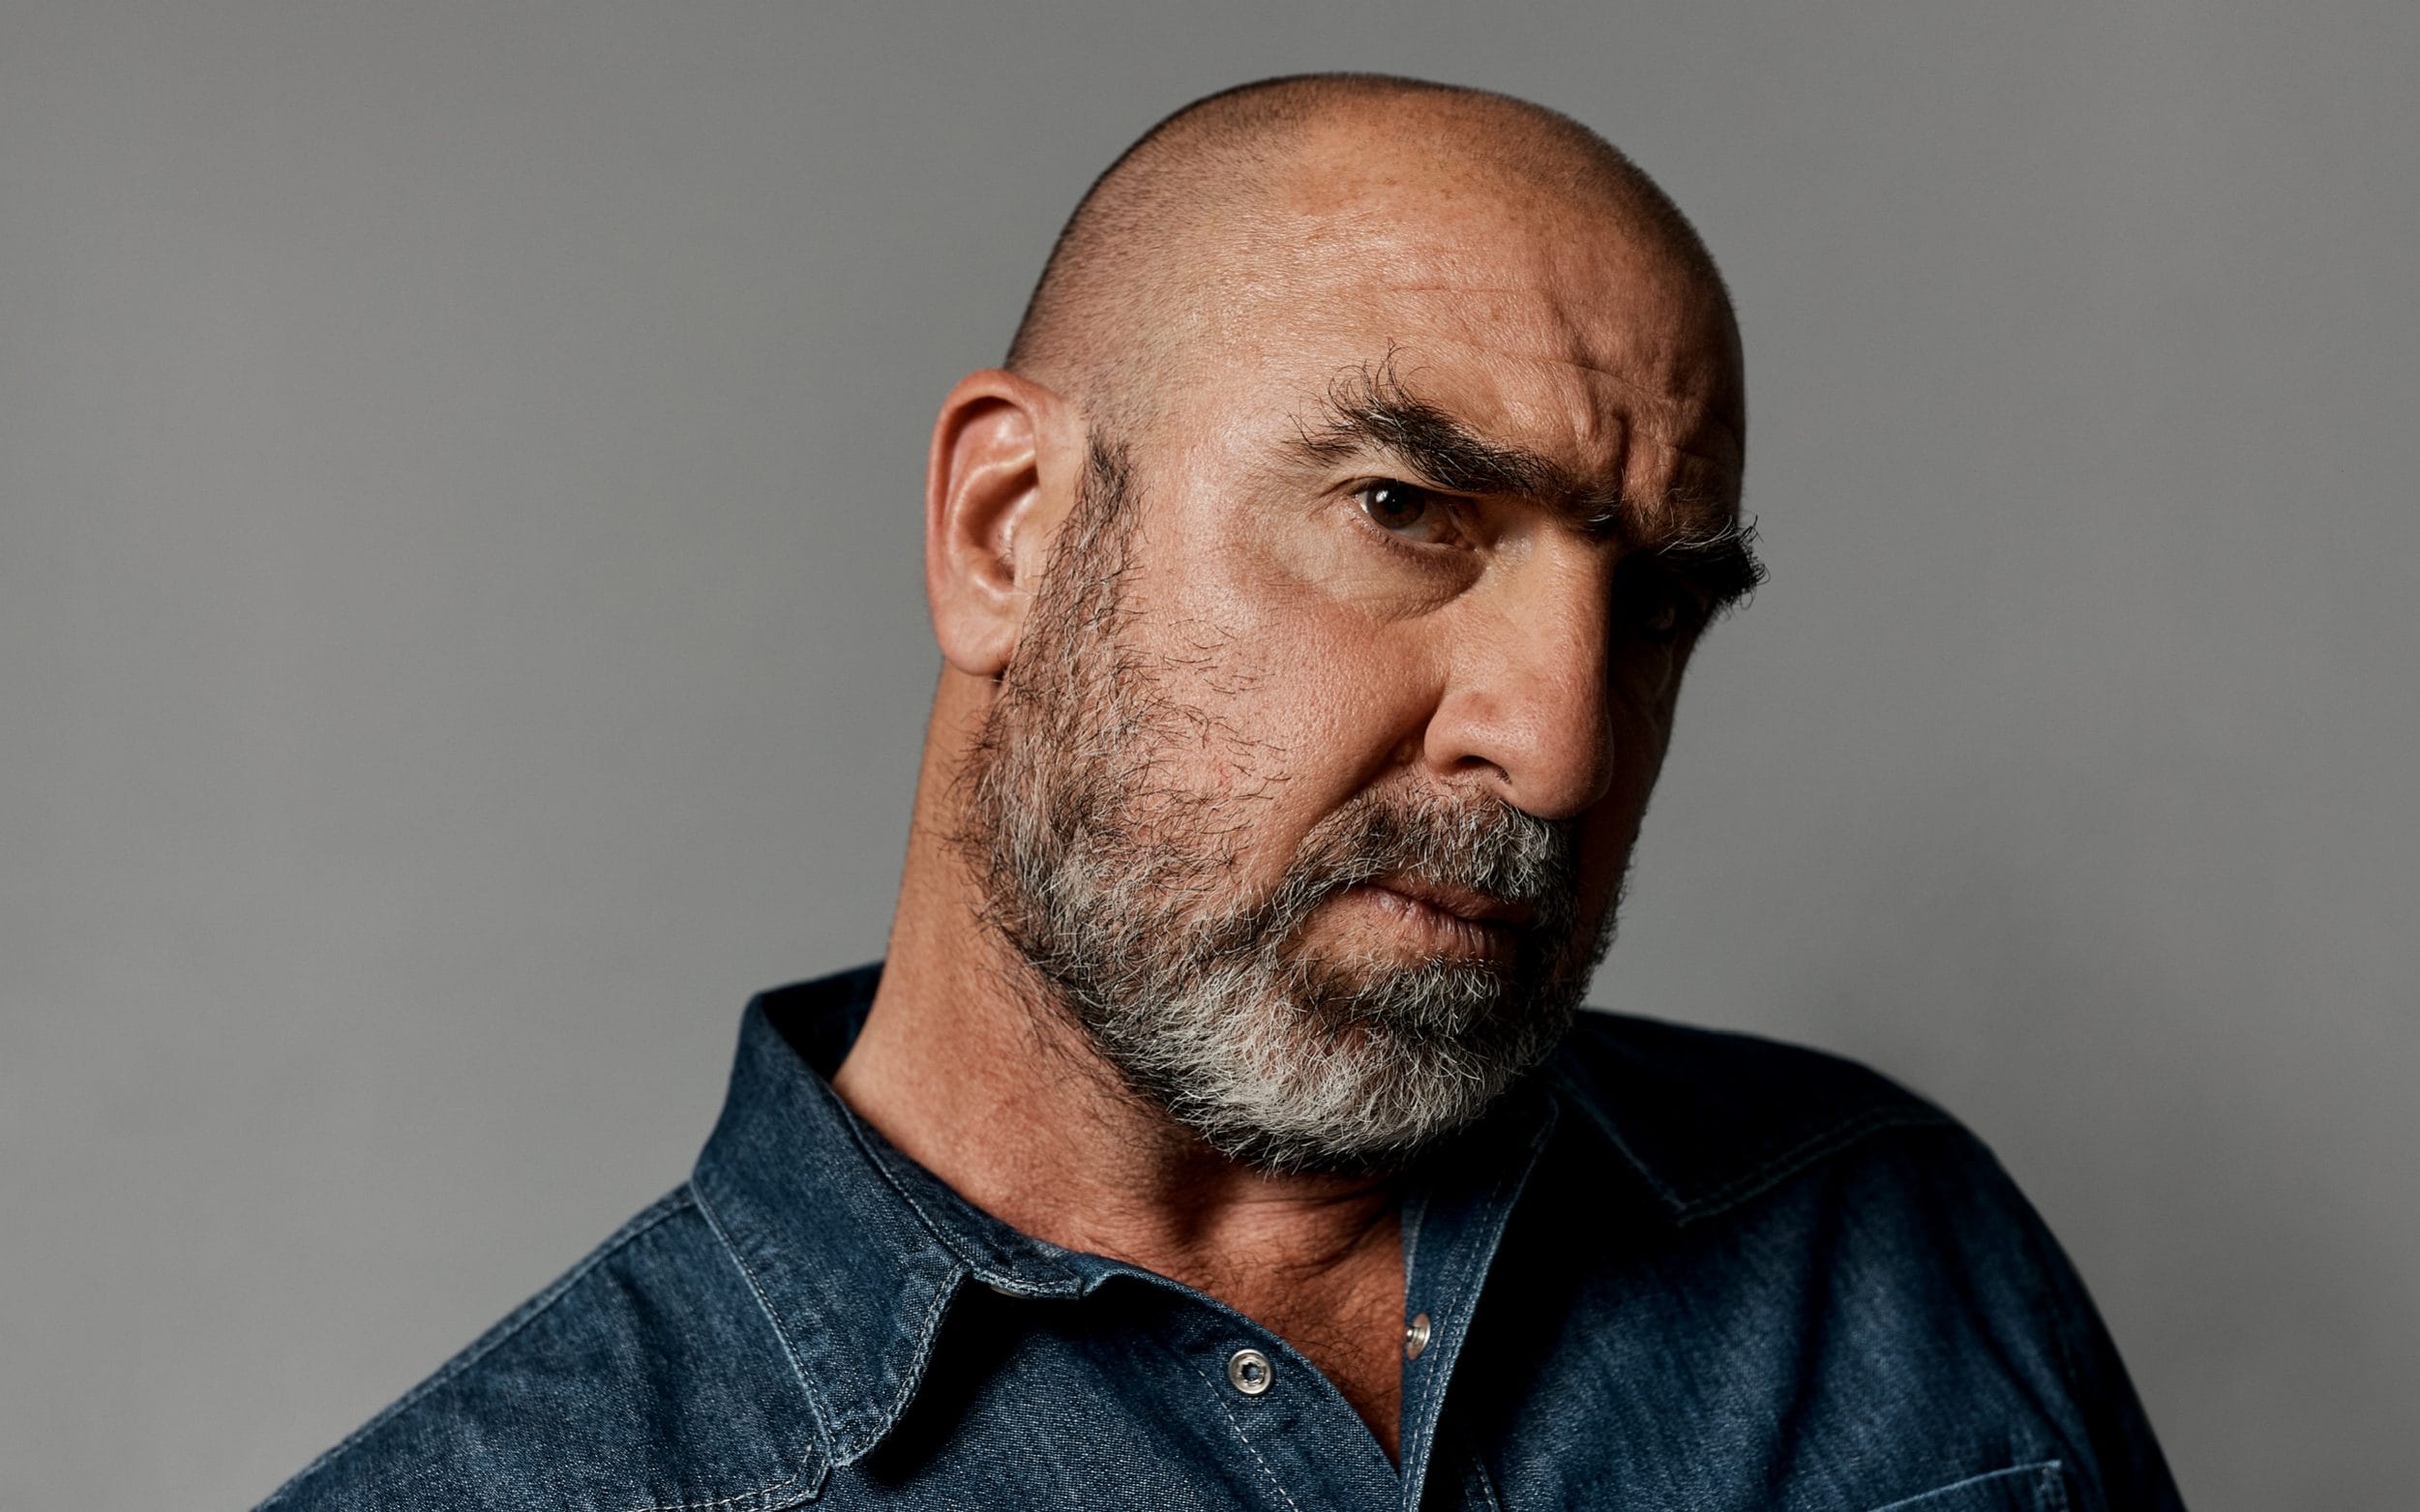 18 Facts About Eric Cantona - Facts.net